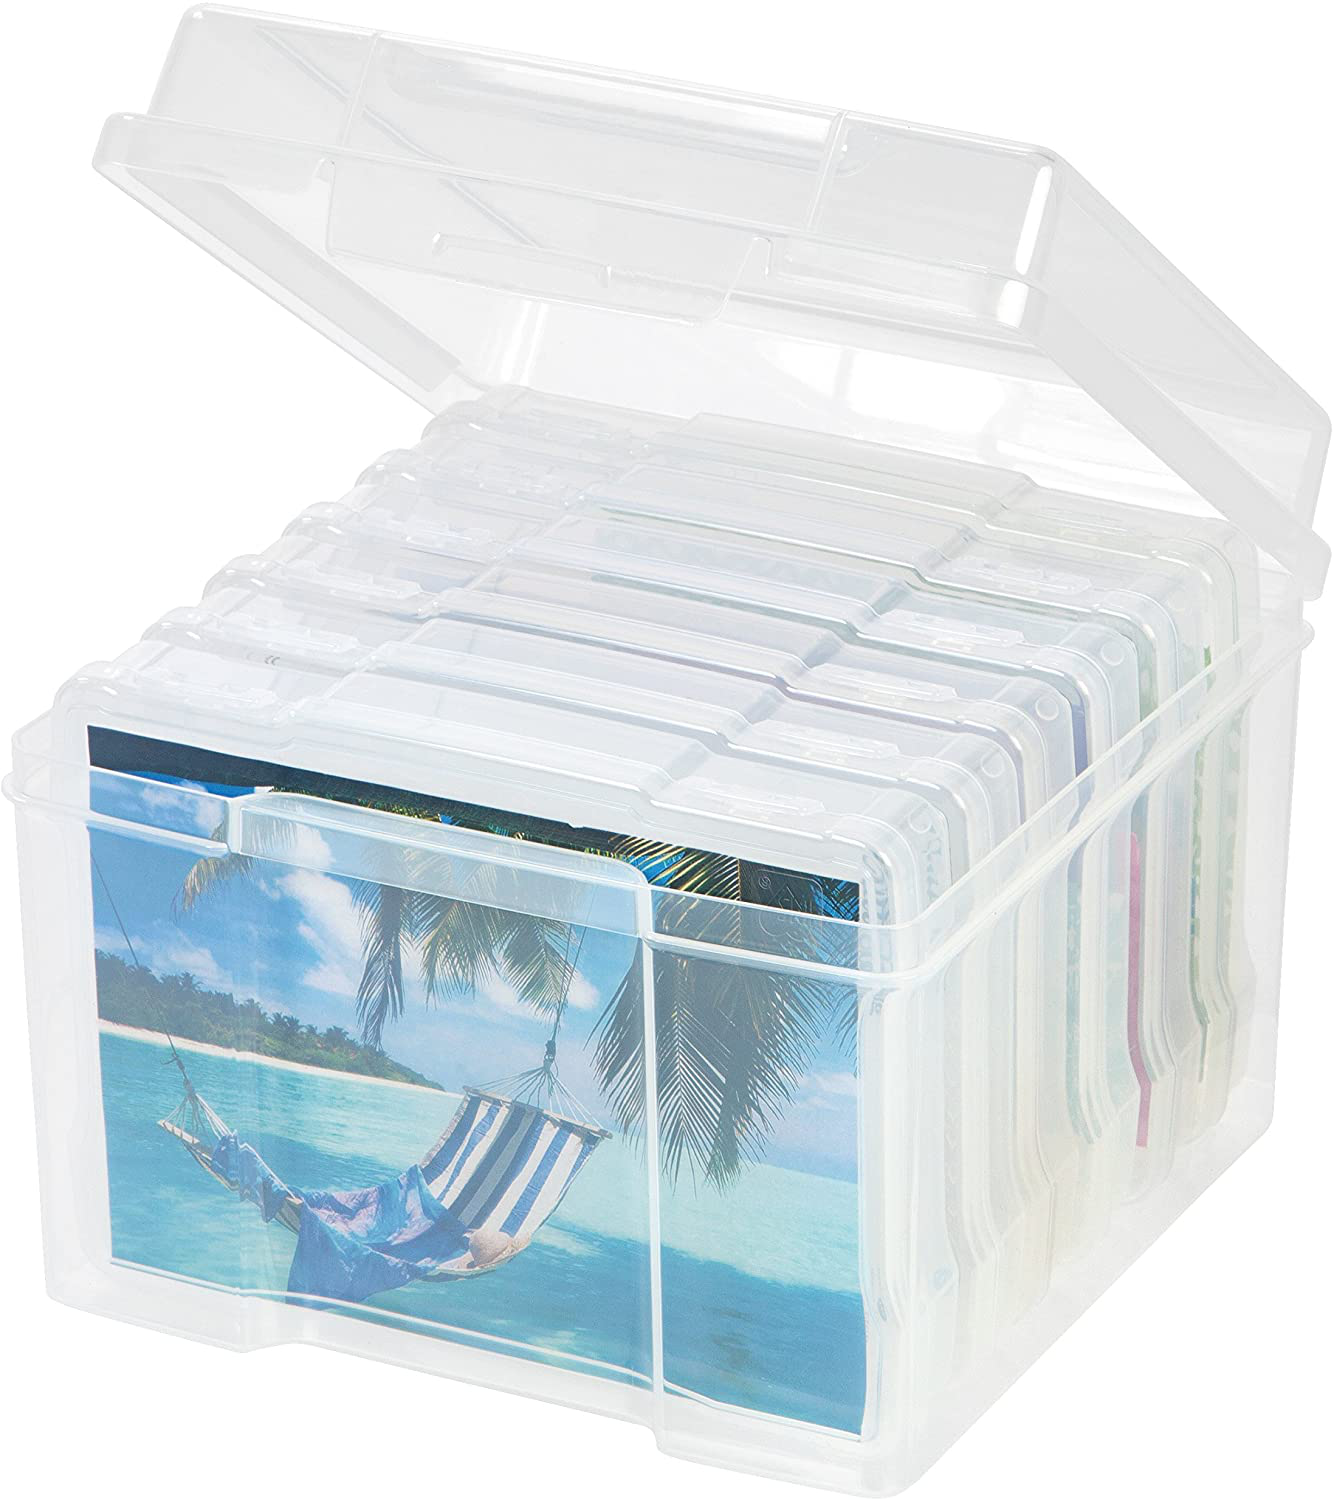 Inner Keeper Organizer Cases Storage Containers Box for Photos